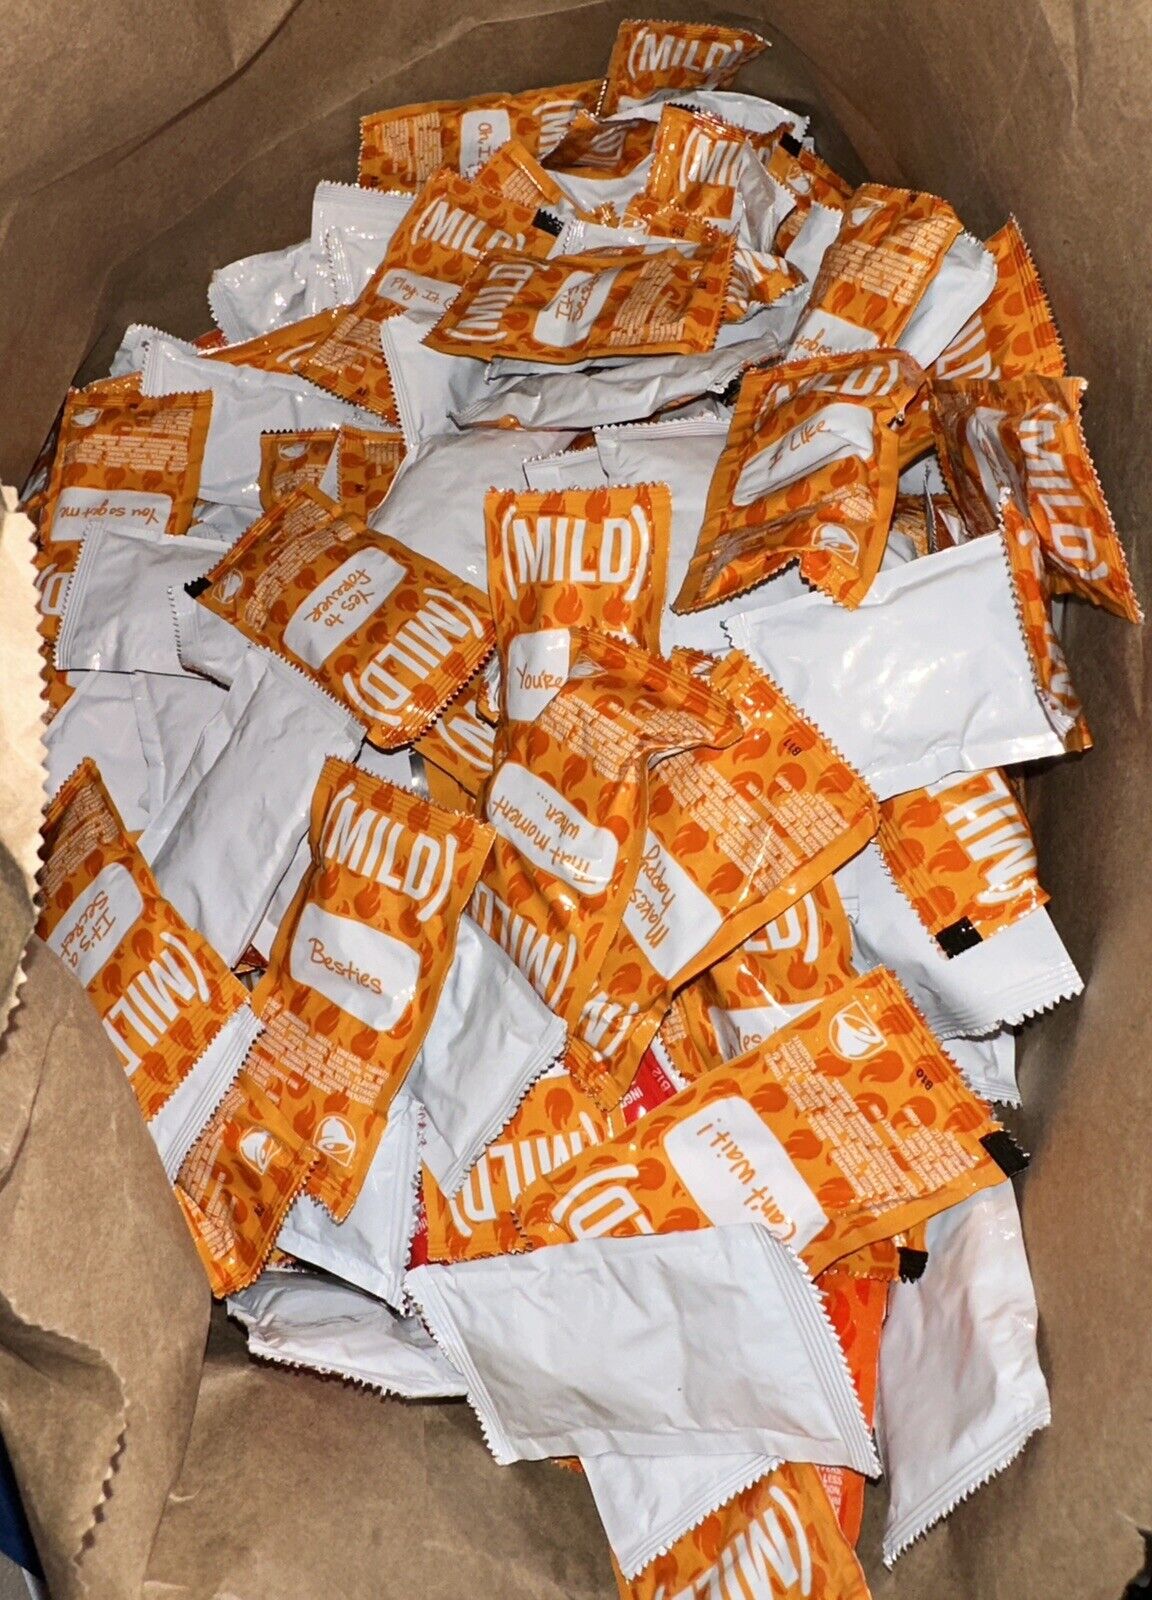 300 Taco Bell MILD Sauce Packets Total Packs 100 x 3